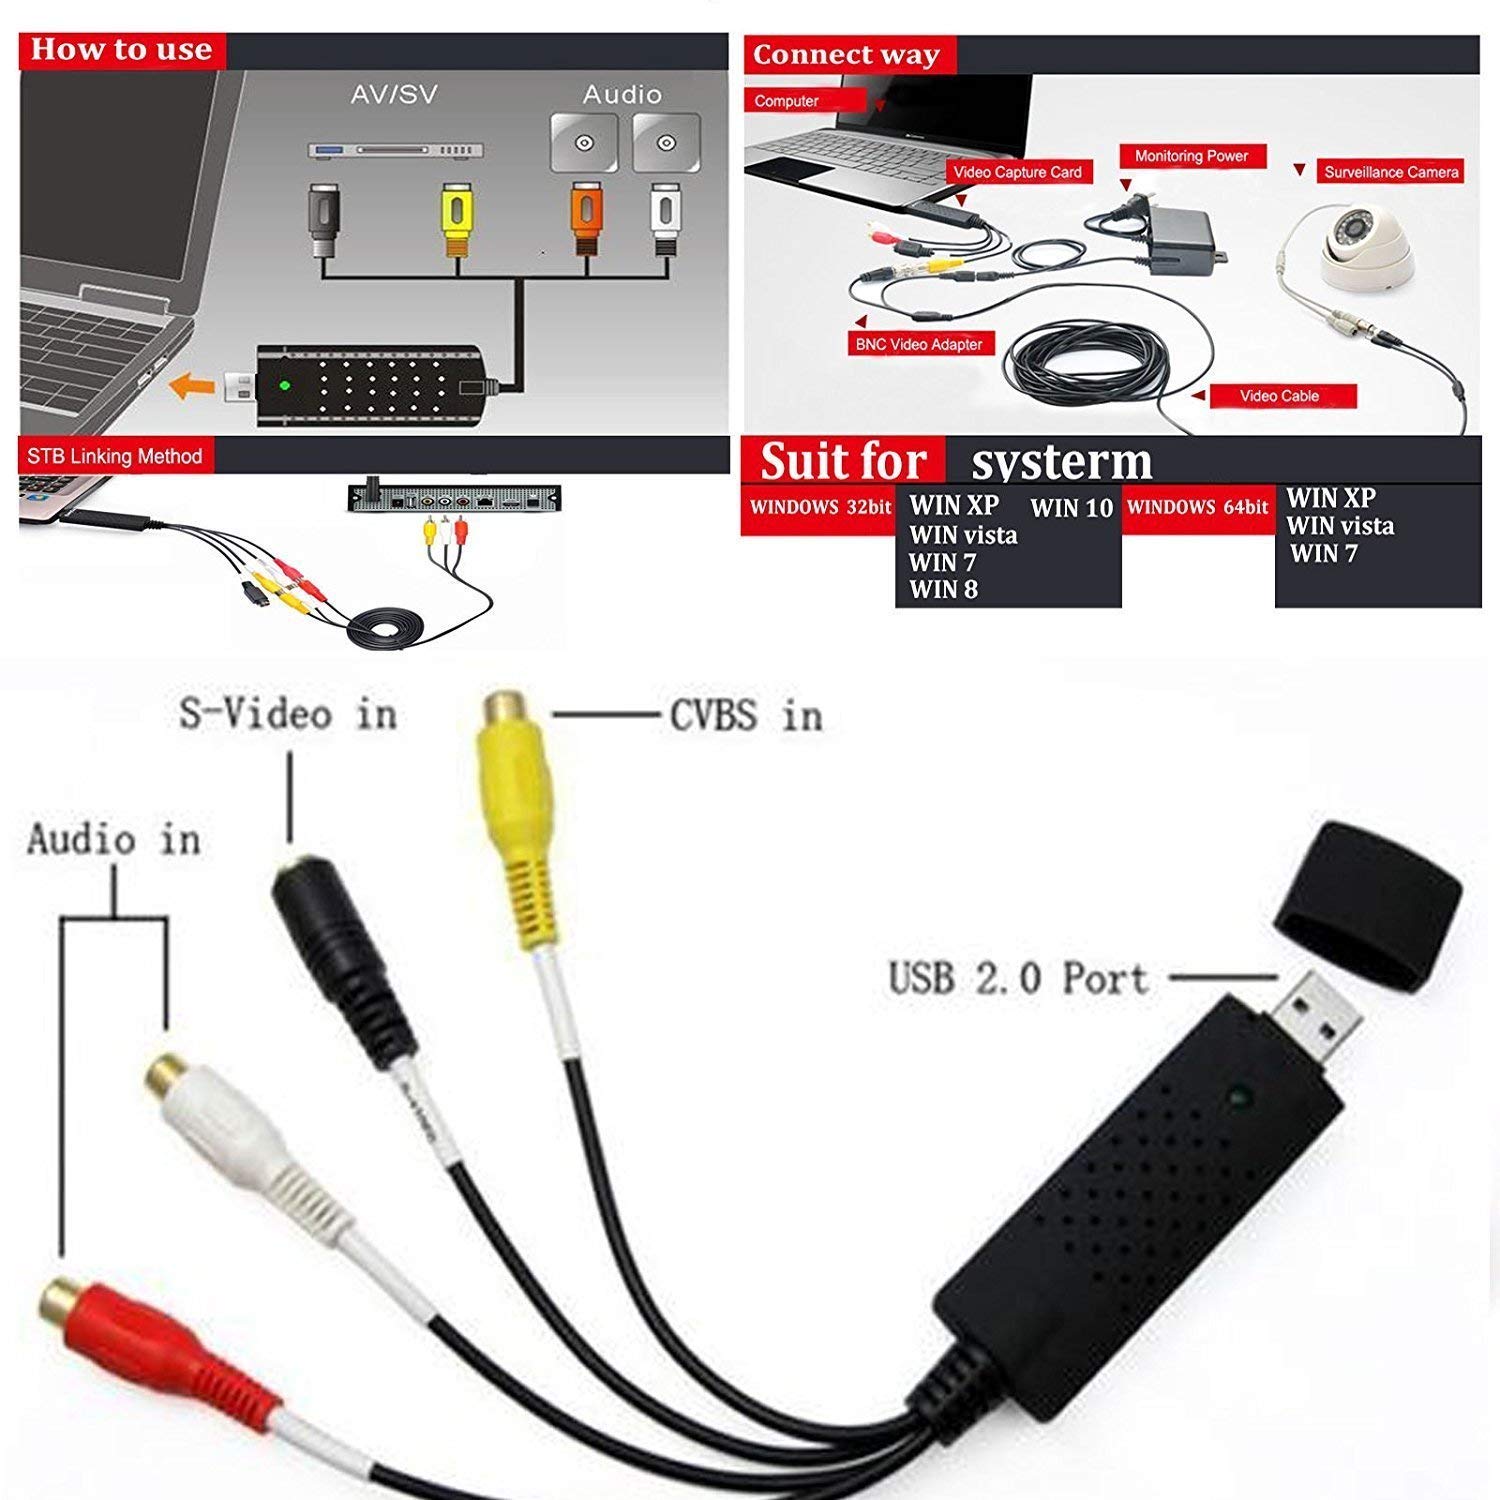 VHS to Digital Converter USB 2.0 Video Audio Capture Card Box VCR DVD TV To Digital Adapter - image 4 of 9